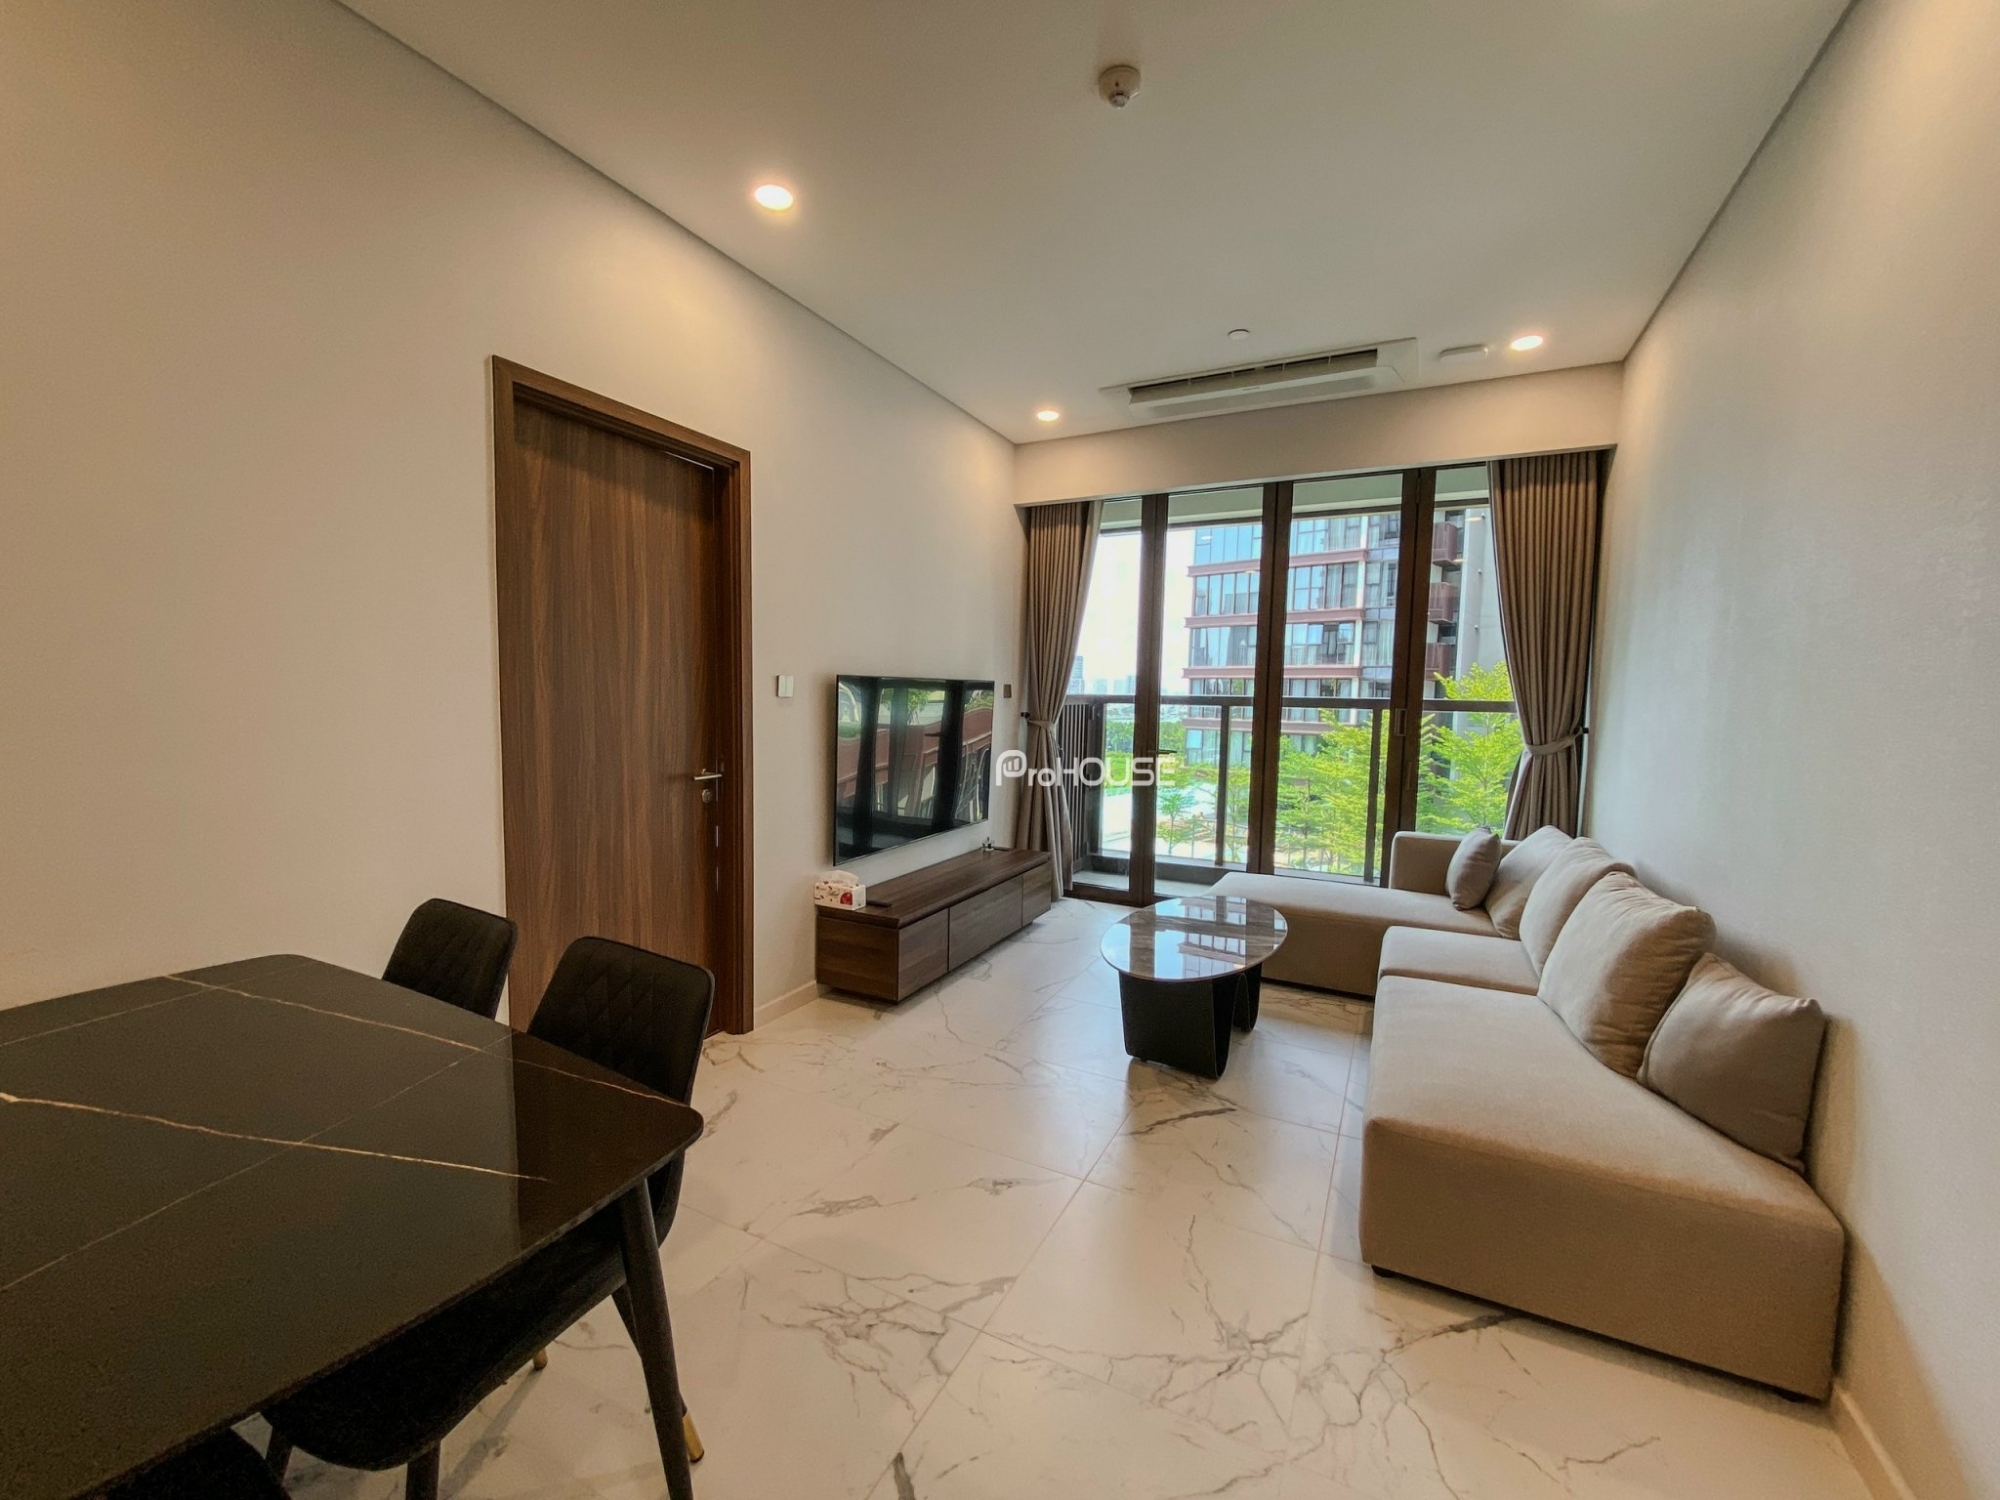 Premium The Metropole apartment for rent with 2 bedrooms fully furnished